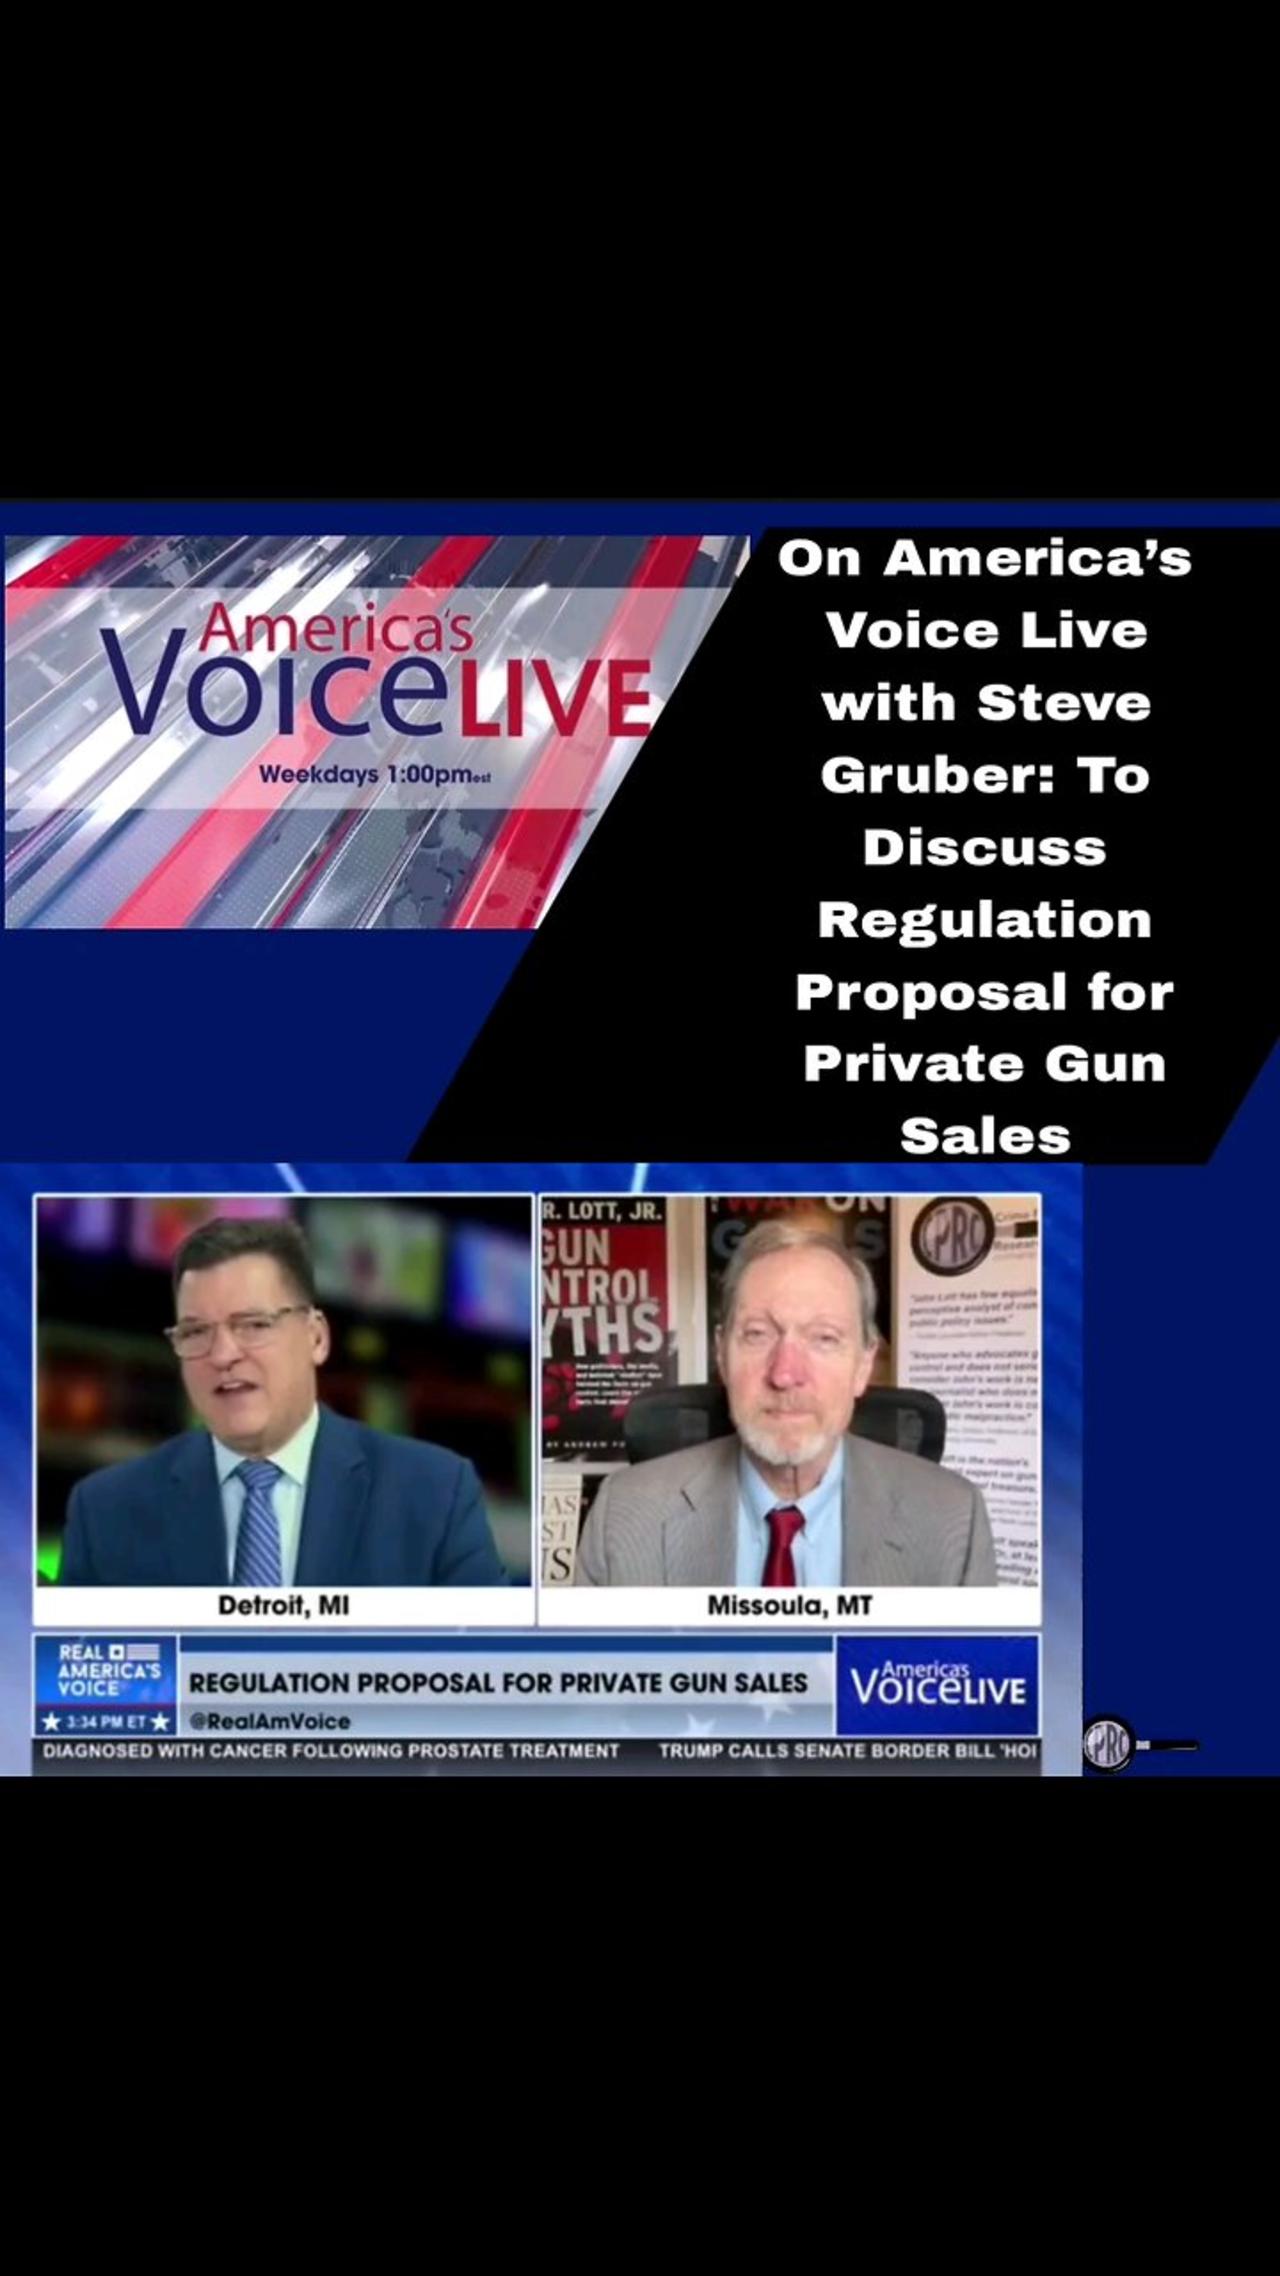 We join Steve Gruber on America’s Voice Live